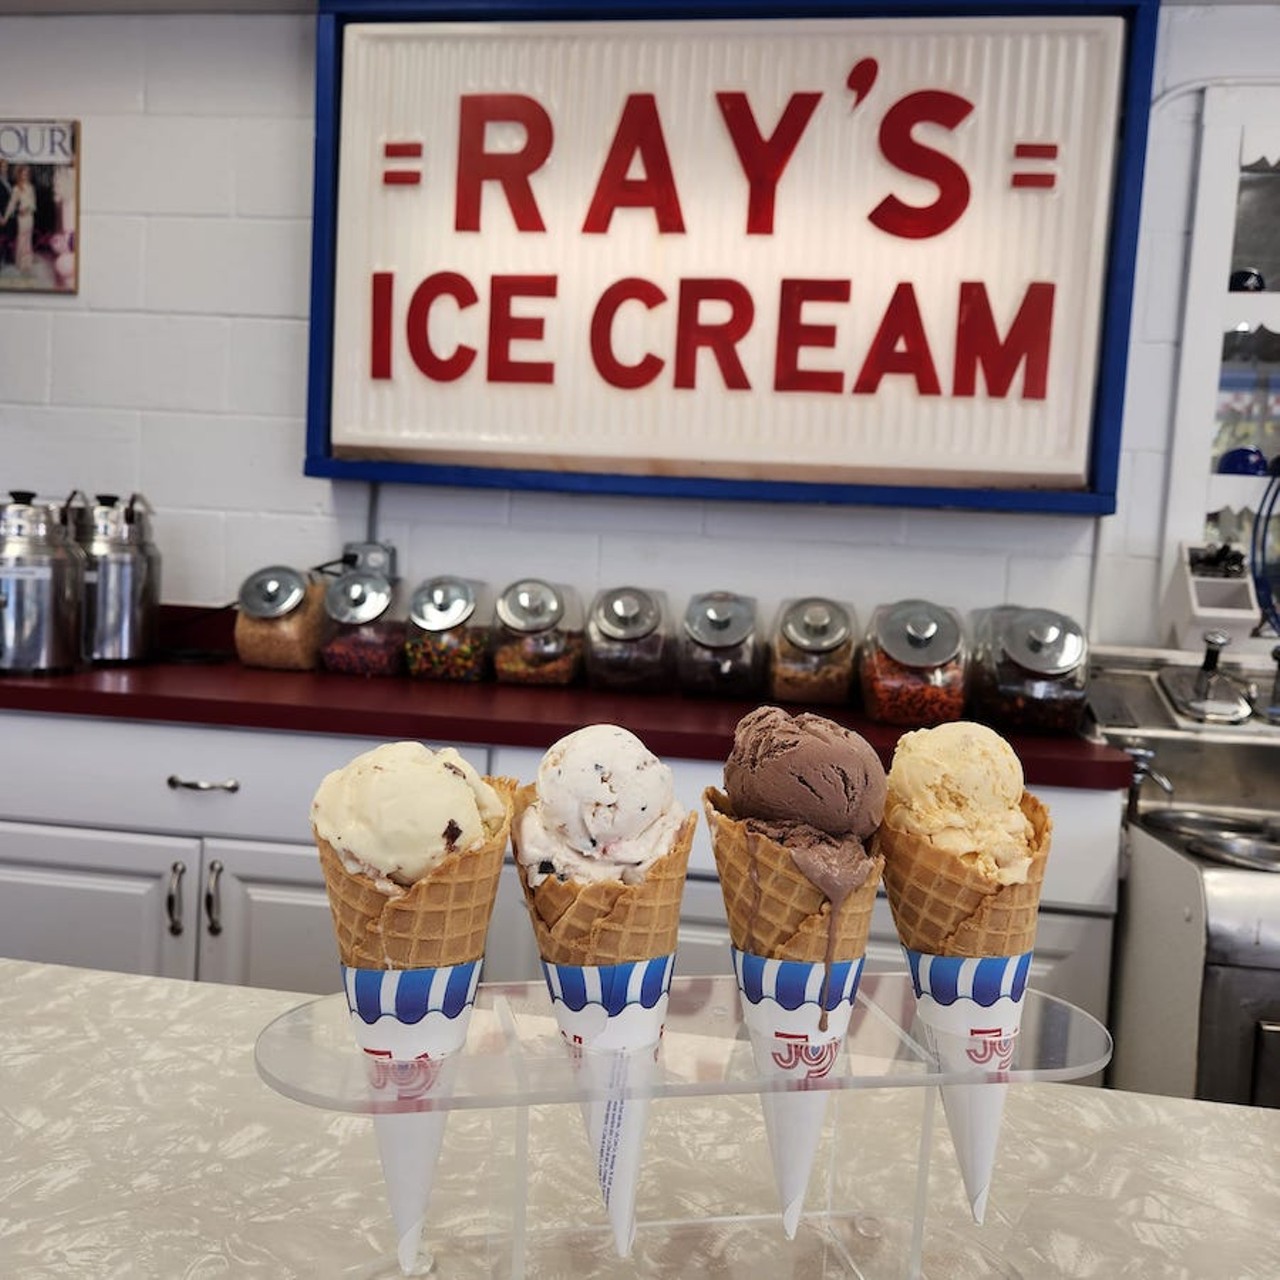 Ray's Ice Cream
4233 Coolidge Hwy., Royal Oak; 888-549-5256; raysicecream.com
Since 1958, Ray’s Ice Cream has been staying true to the retro soda shop vibe while serving out classic ice flavors like Mackinaw Island Fudge and Cherry Vanilla.